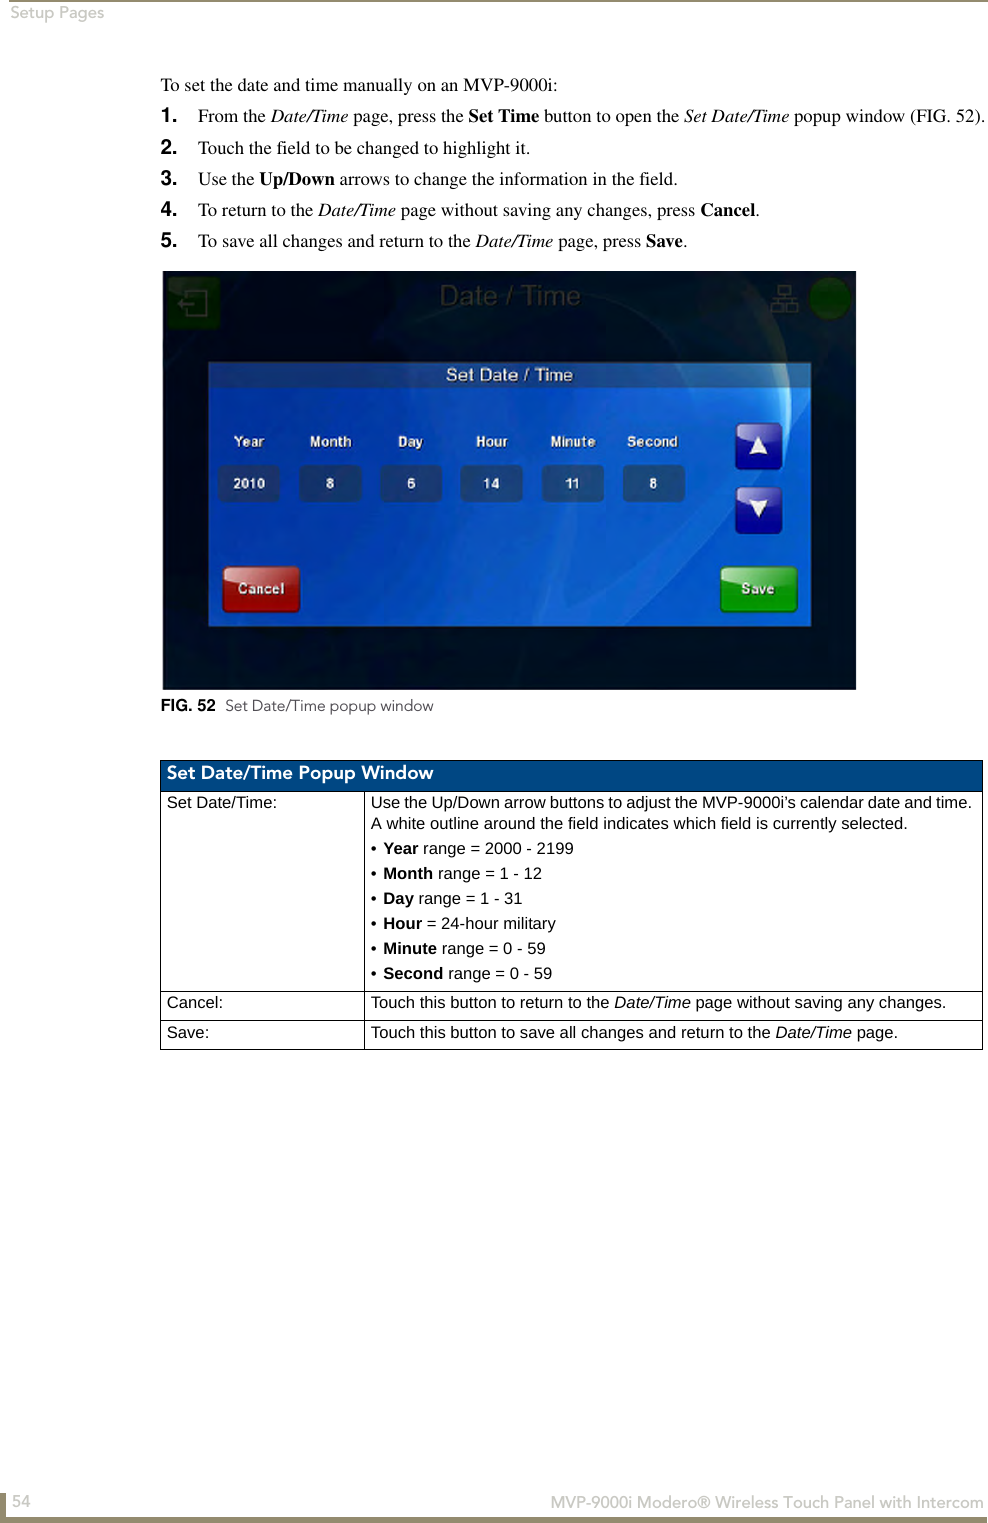 Setup Pages54  MVP-9000i Modero® Wireless Touch Panel with IntercomTo set the date and time manually on an MVP-9000i:1. From the Date/Time page, press the Set Time button to open the Set Date/Time popup window (FIG. 52).2. Touch the field to be changed to highlight it.3. Use the Up/Down arrows to change the information in the field.4. To return to the Date/Time page without saving any changes, press Cancel.5. To save all changes and return to the Date/Time page, press Save.FIG. 52  Set Date/Time popup windowSet Date/Time Popup WindowSet Date/Time: Use the Up/Down arrow buttons to adjust the MVP-9000i’s calendar date and time. A white outline around the field indicates which field is currently selected.•Year range = 2000 - 2199•Month range = 1 - 12•Day range = 1 - 31•Hour = 24-hour military•Minute range = 0 - 59•Second range = 0 - 59Cancel: Touch this button to return to the Date/Time page without saving any changes.Save: Touch this button to save all changes and return to the Date/Time page.